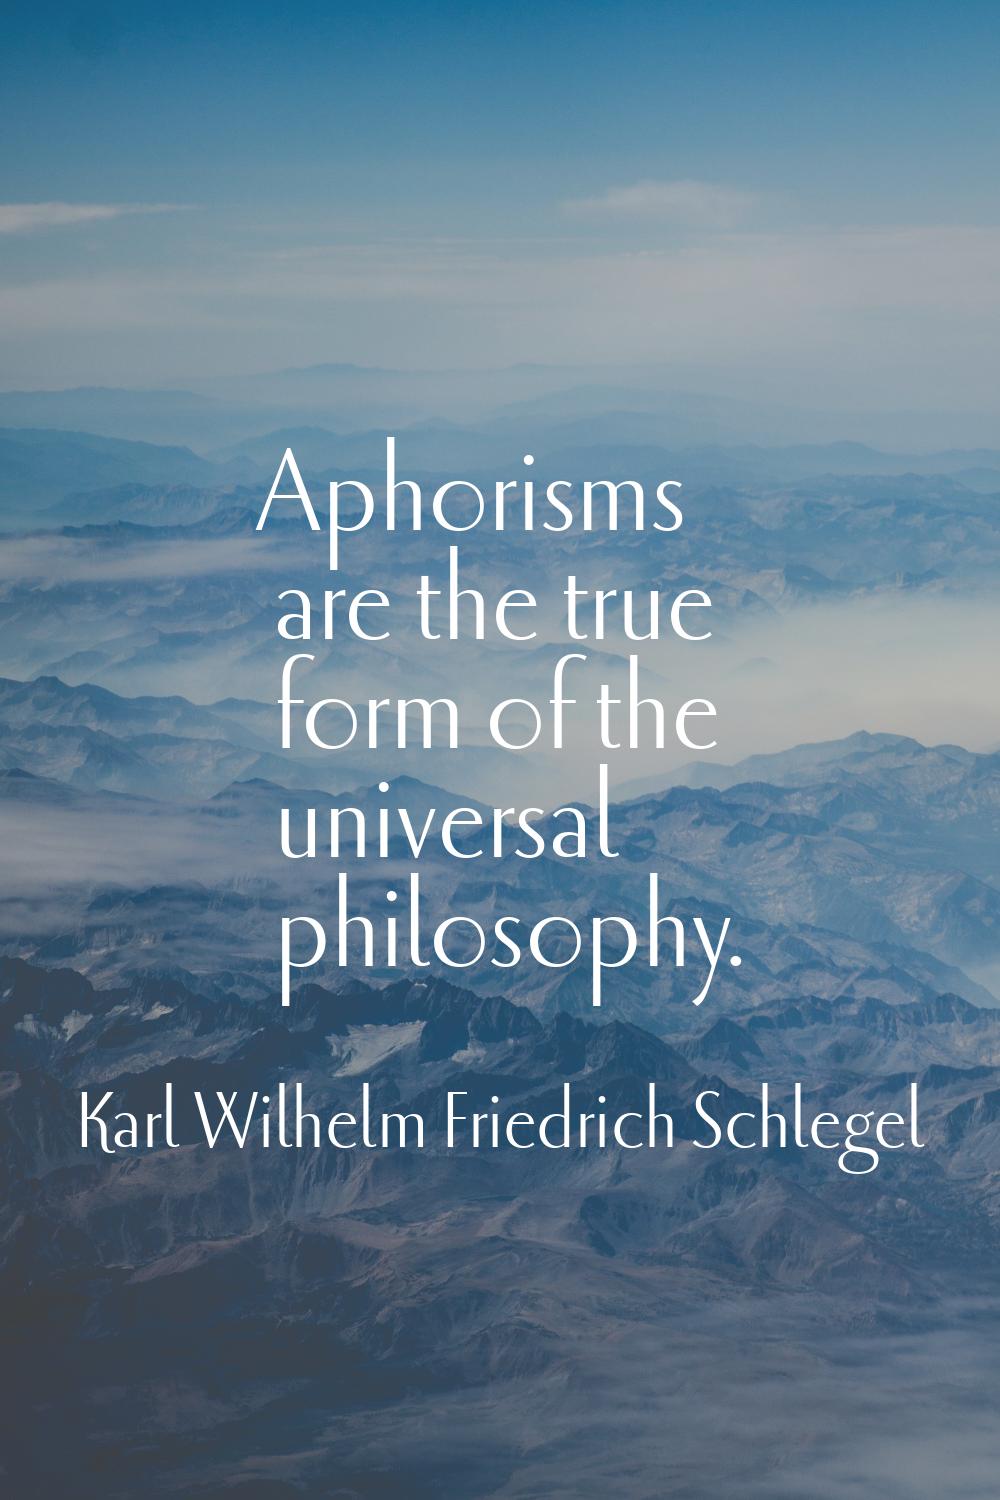 Aphorisms are the true form of the universal philosophy.